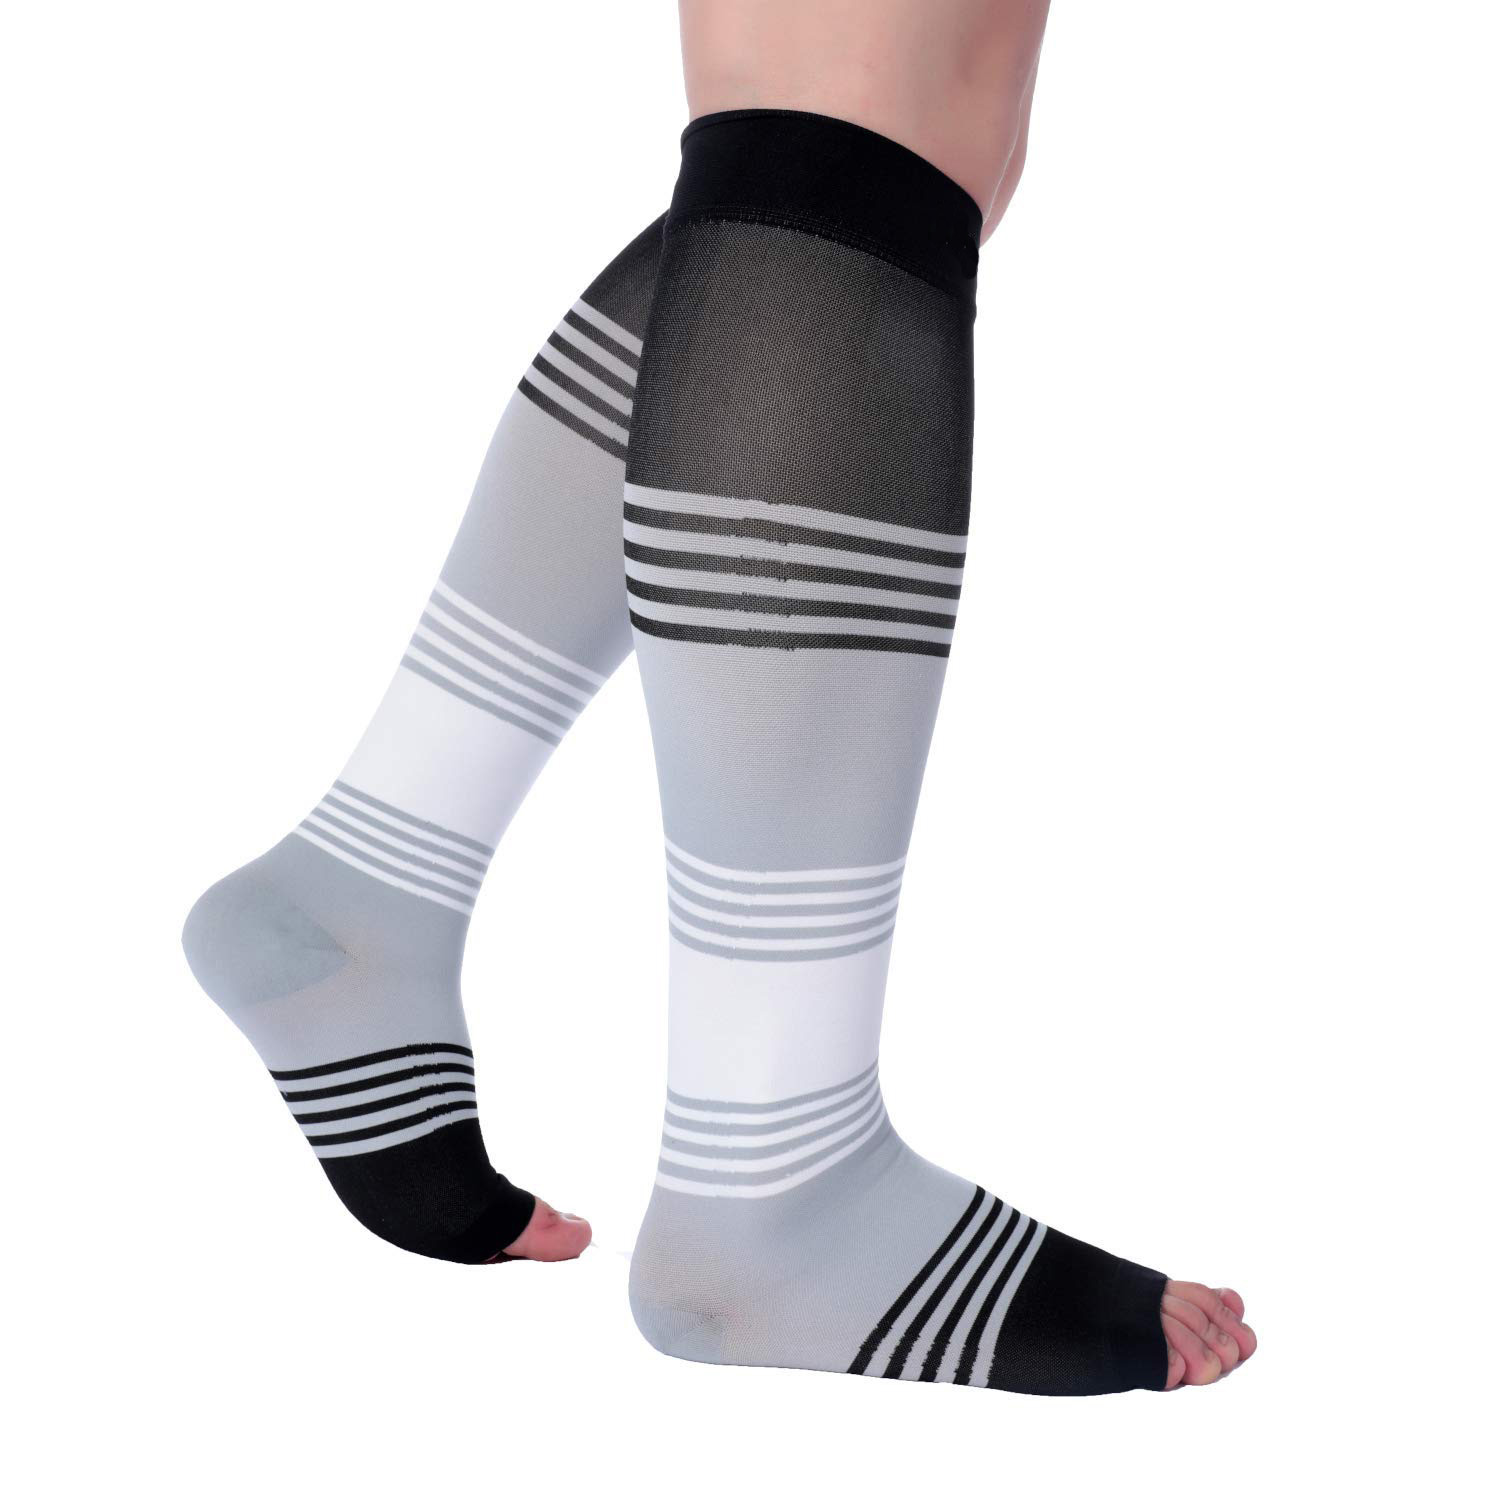 Wholesale Compression Stockings, Medical Grade Firm Support 20-30mmHg,  Unisex, Open Toe Knee High Compression Socks for Varicose Veins, Edema,  Shin Splints, Nursing, Travel manufacturers and suppliers